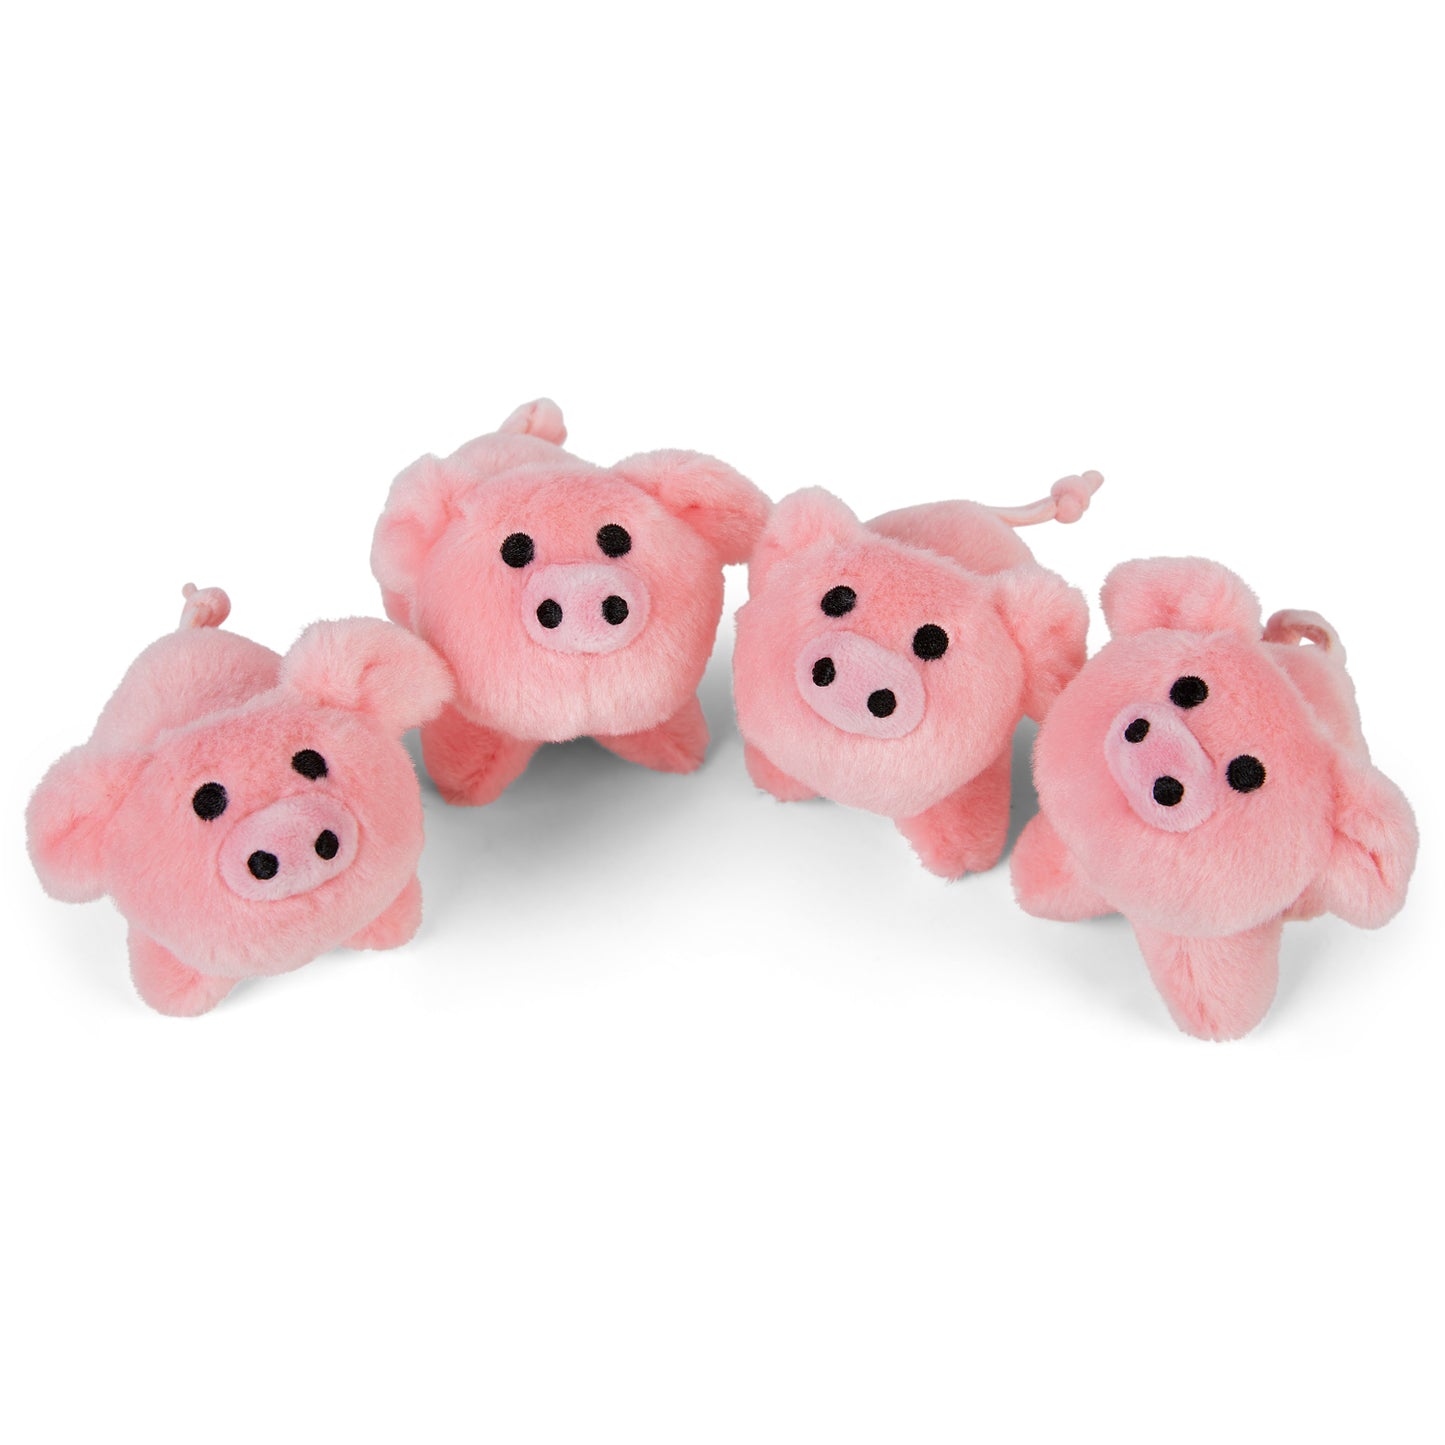 Mamanimals Cuddly Toy Baby Pigs, 4 pieces